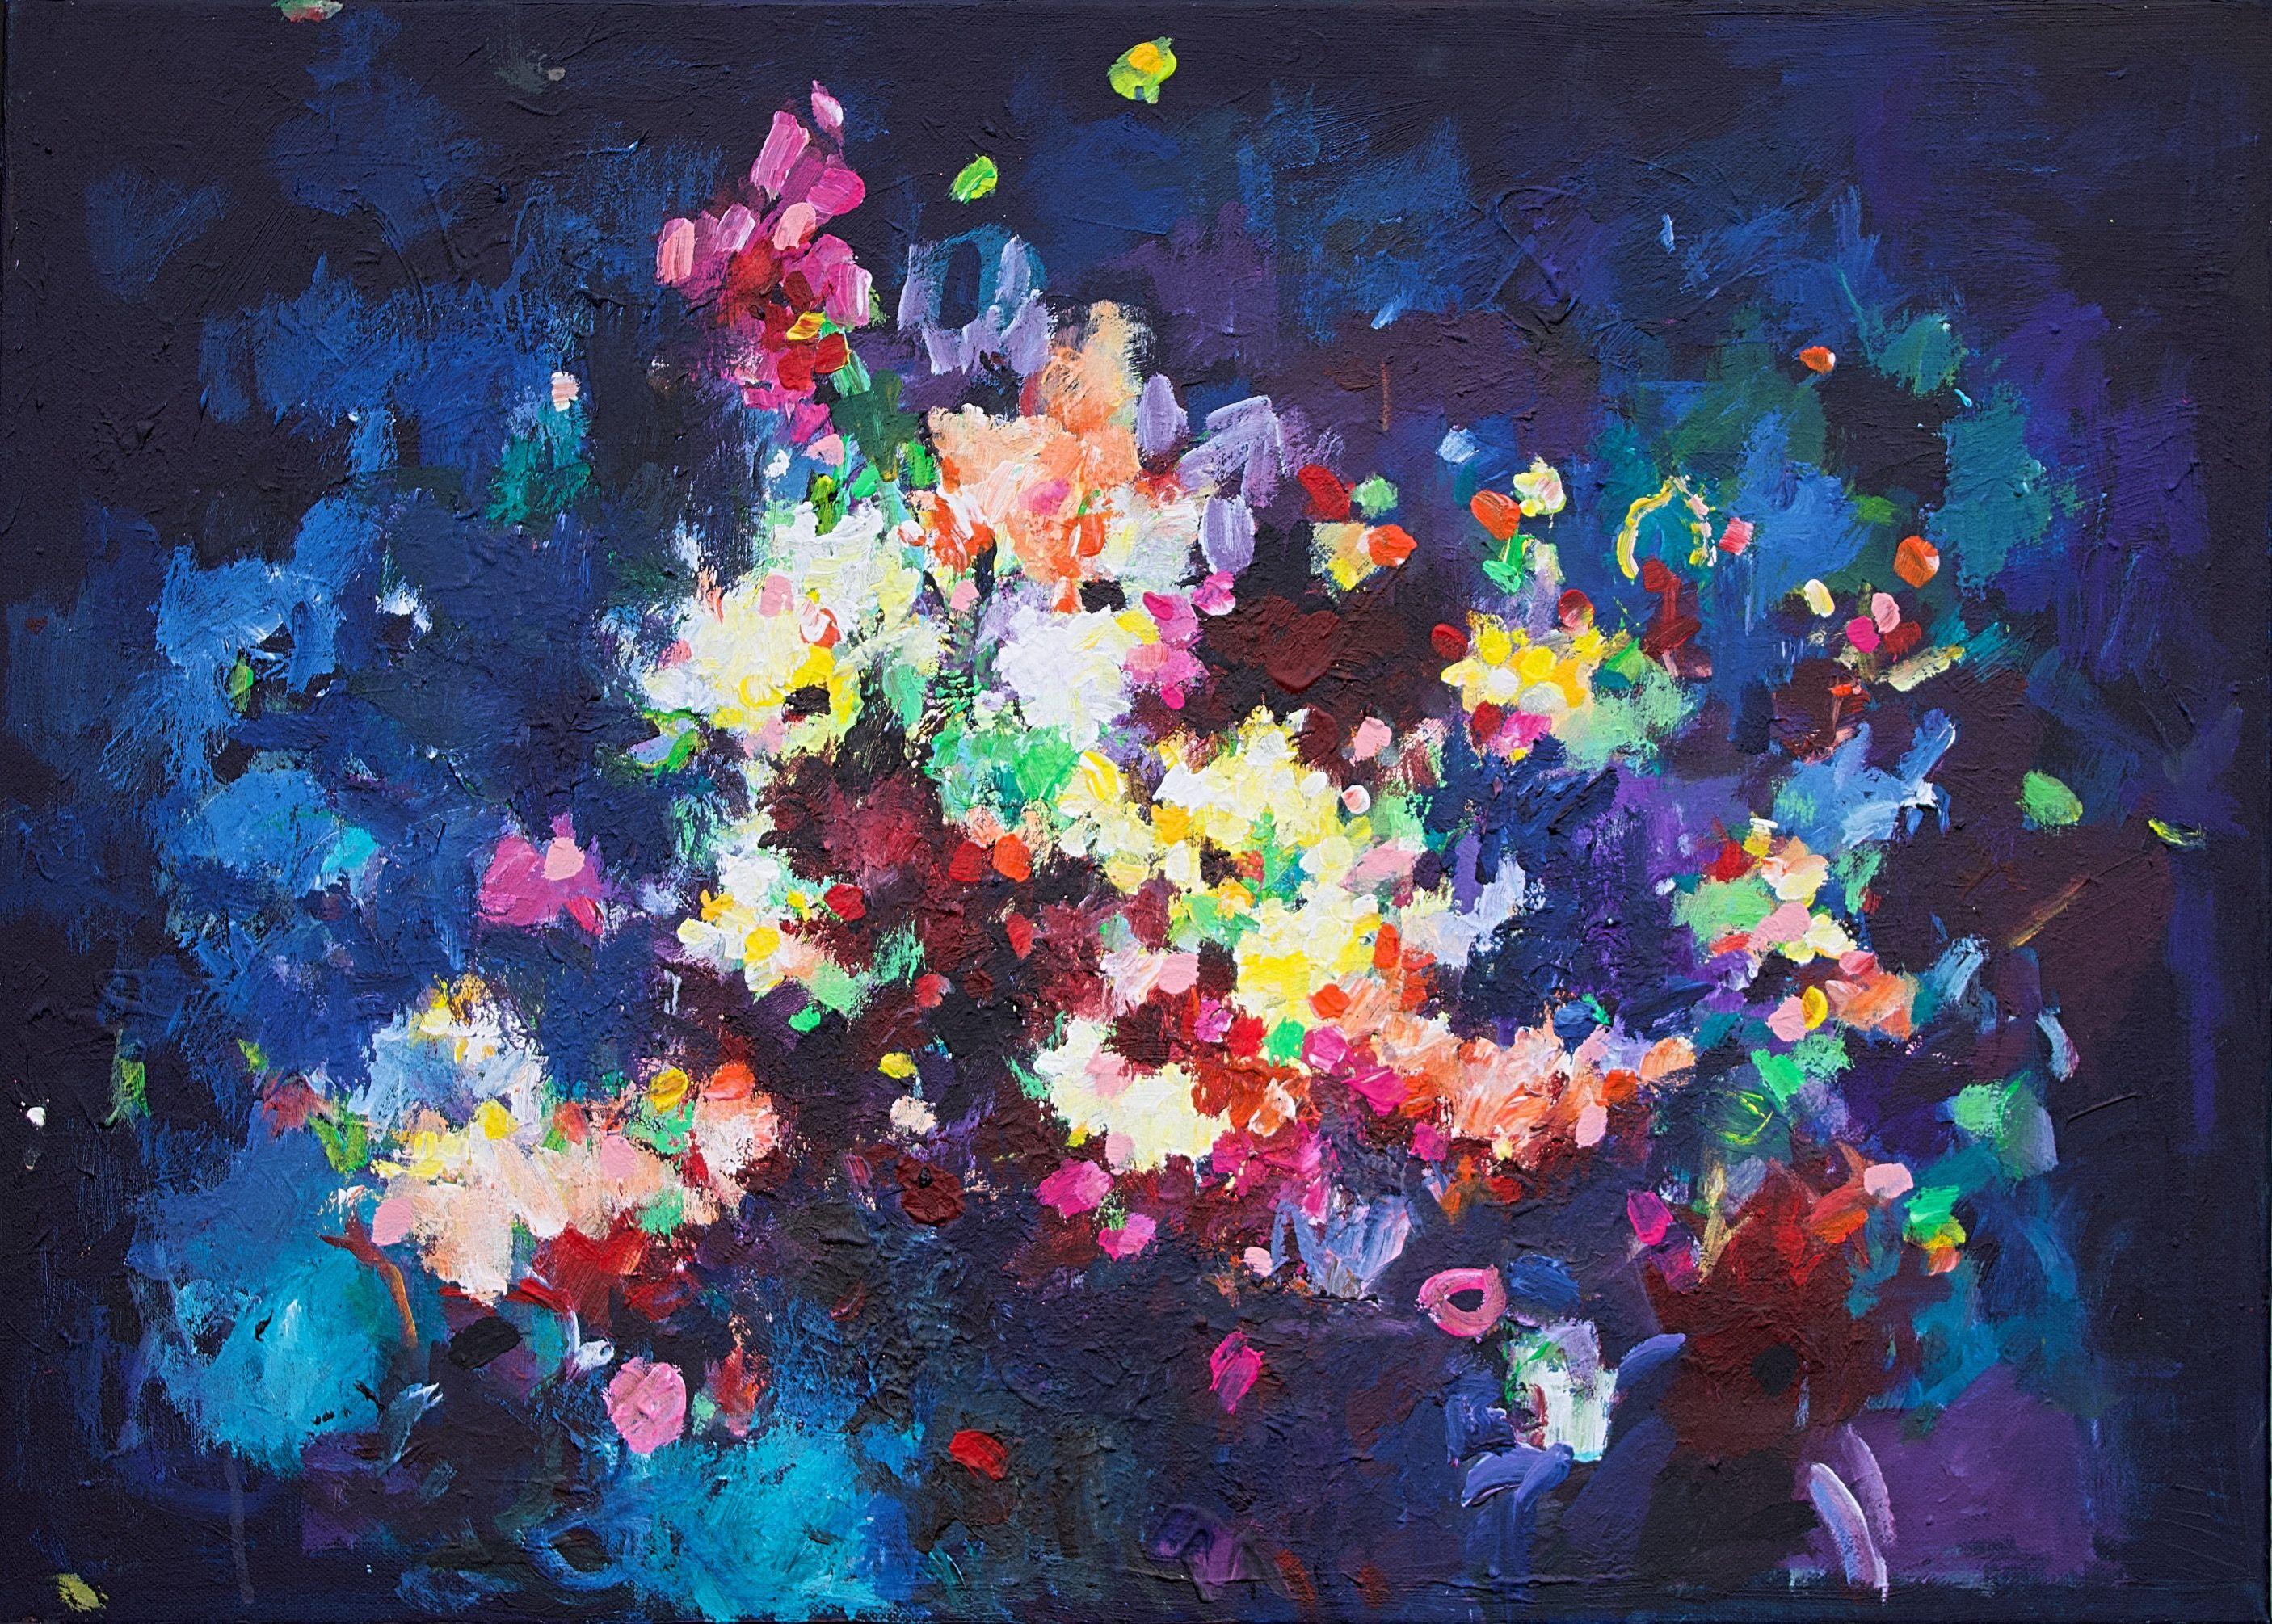 This is an abstract painting of a bouquet of flowers. It has a dark background in blue and black hues with the bright and contrasting colors popping out. The bright colors are in yellows, pinks, purple and white. Despite the dark background it is a